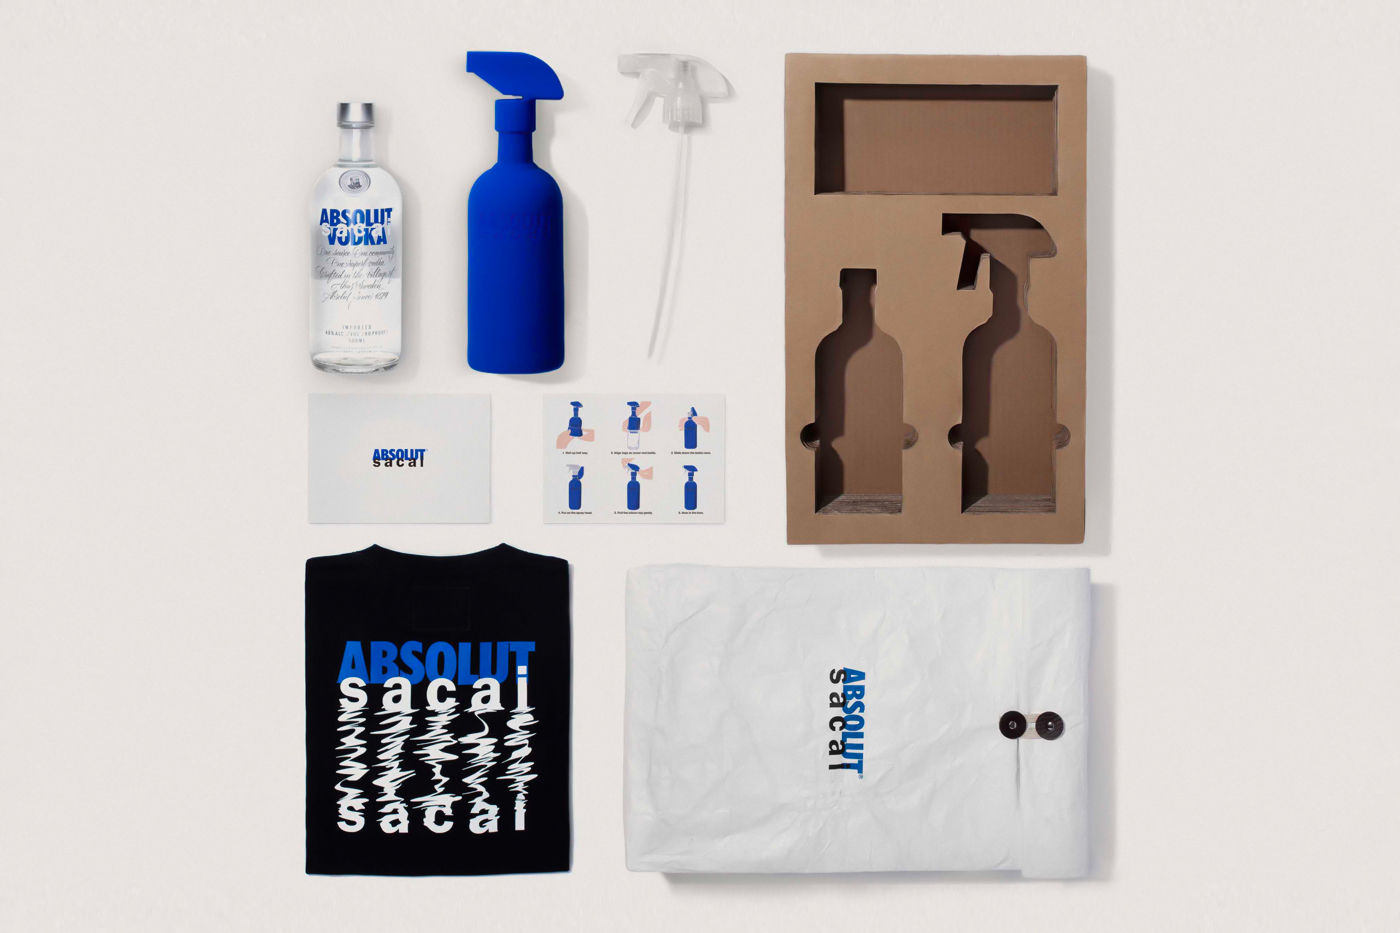 absolut and sacai Come Together for Limited Edition Bottle Set